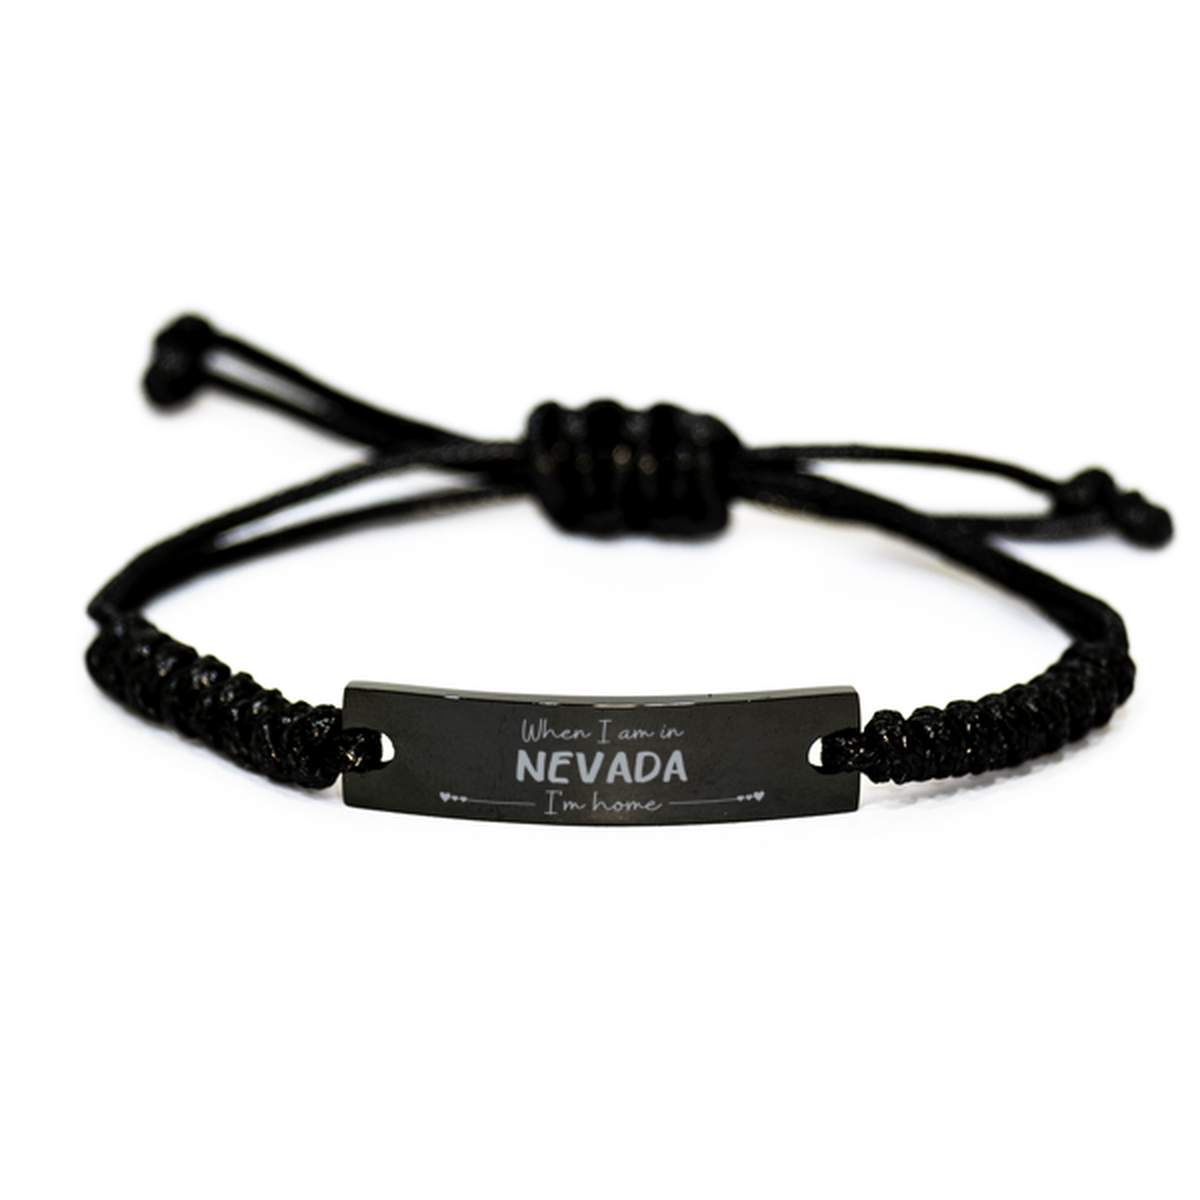 When I am in Nevada I'm home Black Rope Bracelet, Cheap Gifts For Nevada, State Nevada Birthday Gifts for Friends Coworker